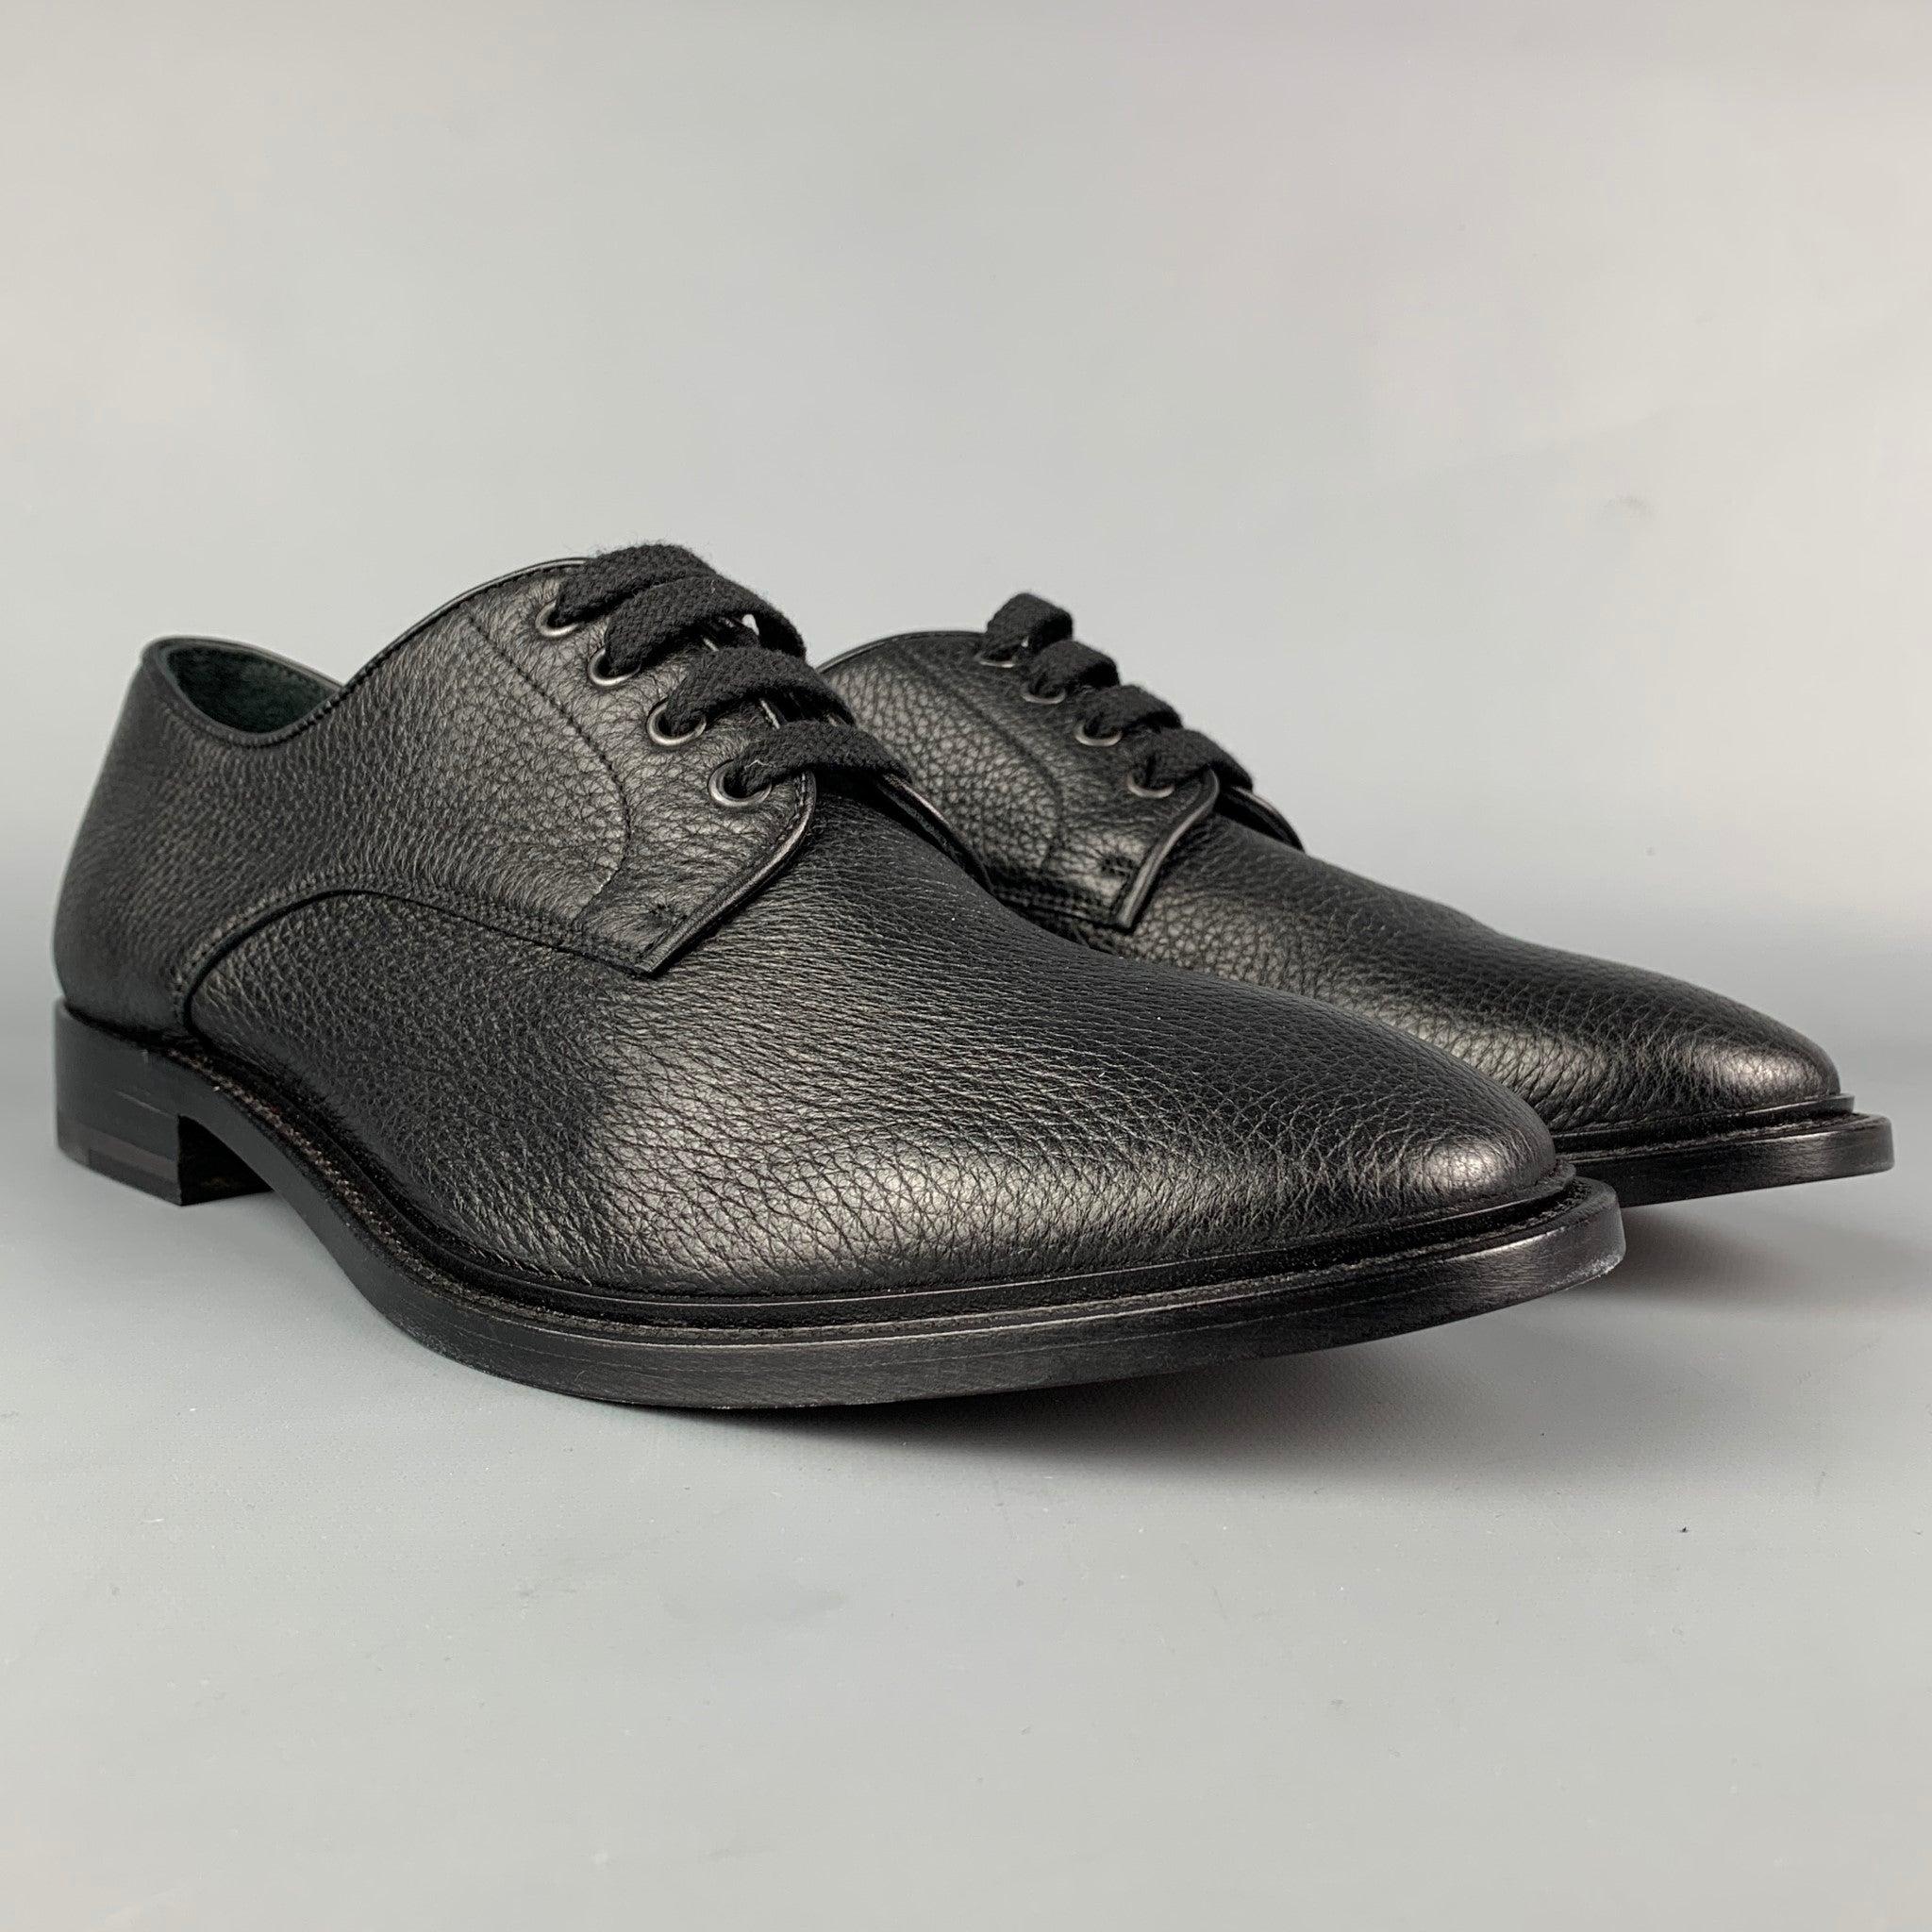 PAUL ANDREW shoes comes in a black leather featuring a cap toe and a lace up closure. Made in Italy.
New With Box.
 

Marked:   202M18 43.5Outsole: 12.25 inches  x 4.75 inches 
  
  
 
Reference: 112720
Category: Lace Up Shoes
More Details
   